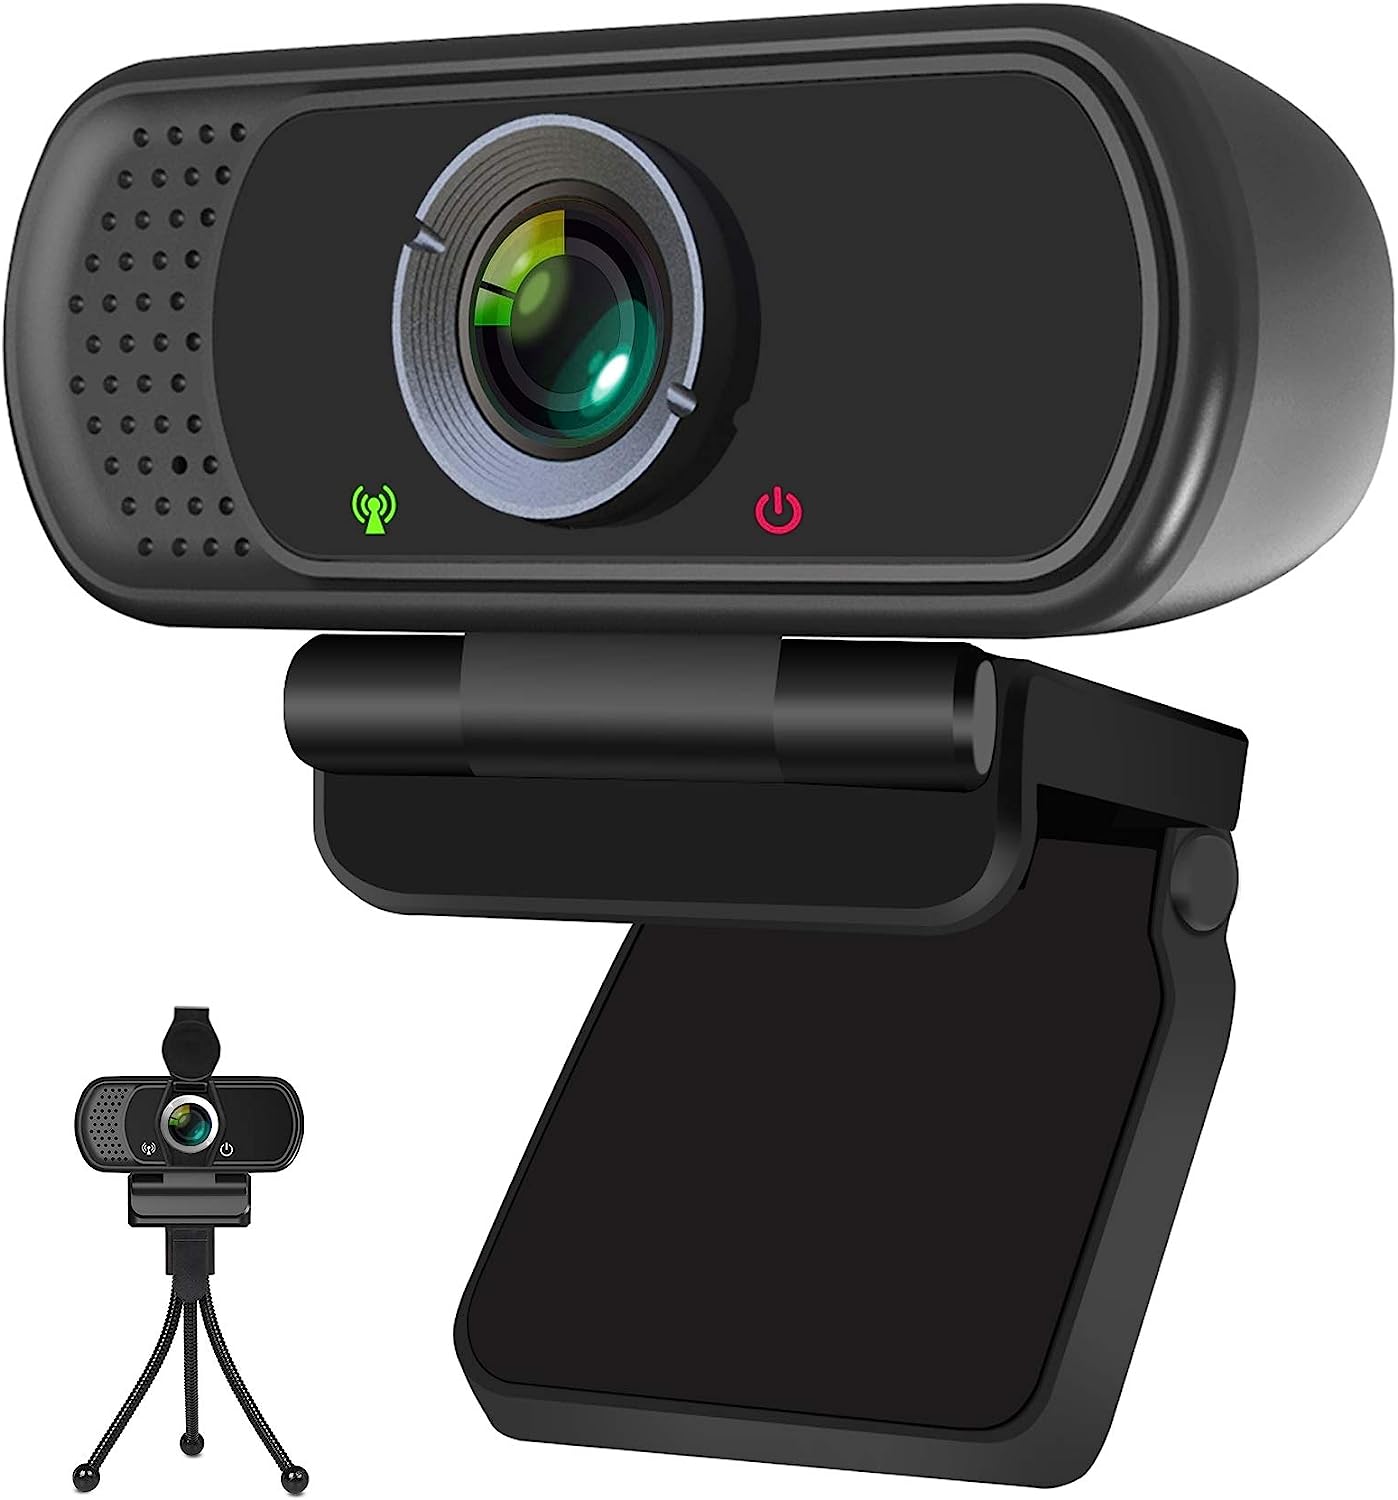 inexpensive webcam detailed review